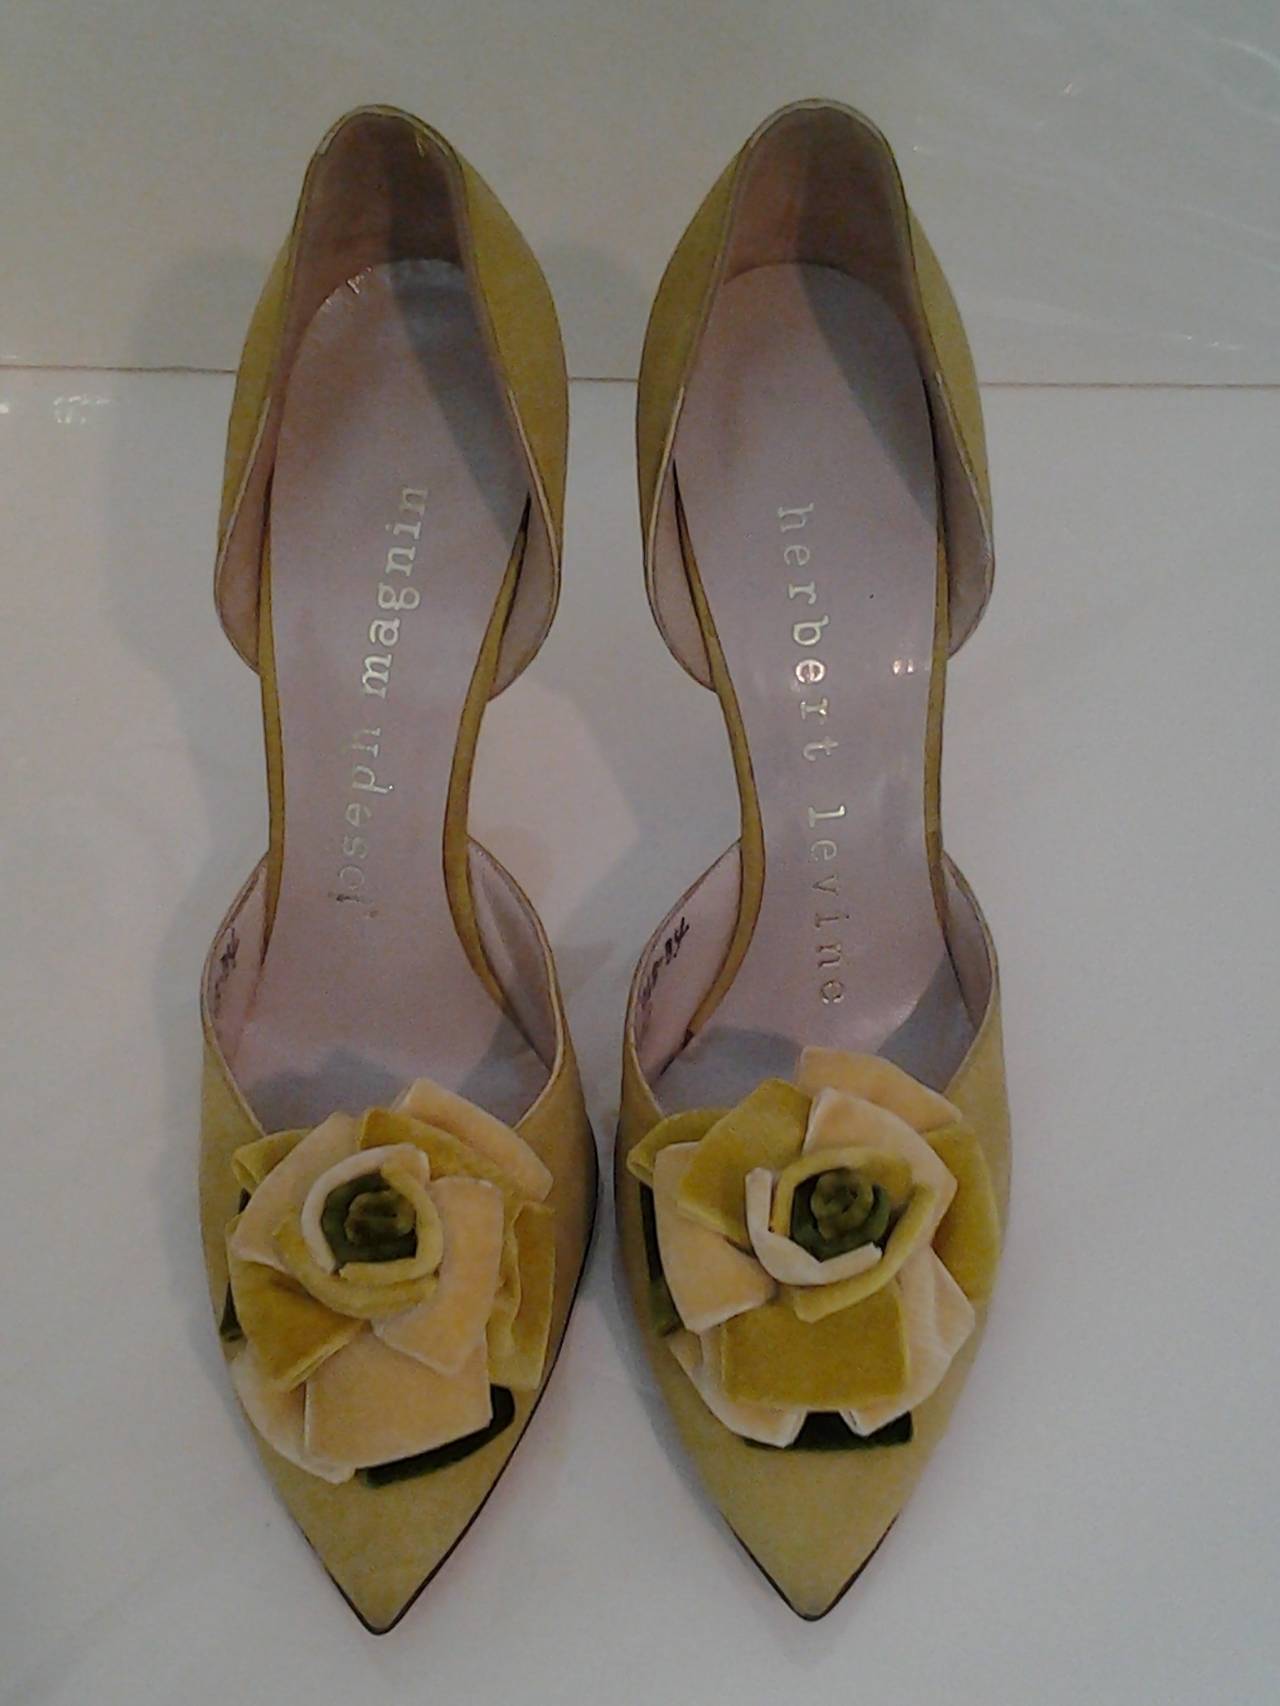 Gorgeous 1950s Herbert Levine chartreuse suede D'Orsay style stiletto pumps with lavish velvet ribbon flower/bow at vamp.  Marked a 7AAA but will fit a 6N. Never worn.